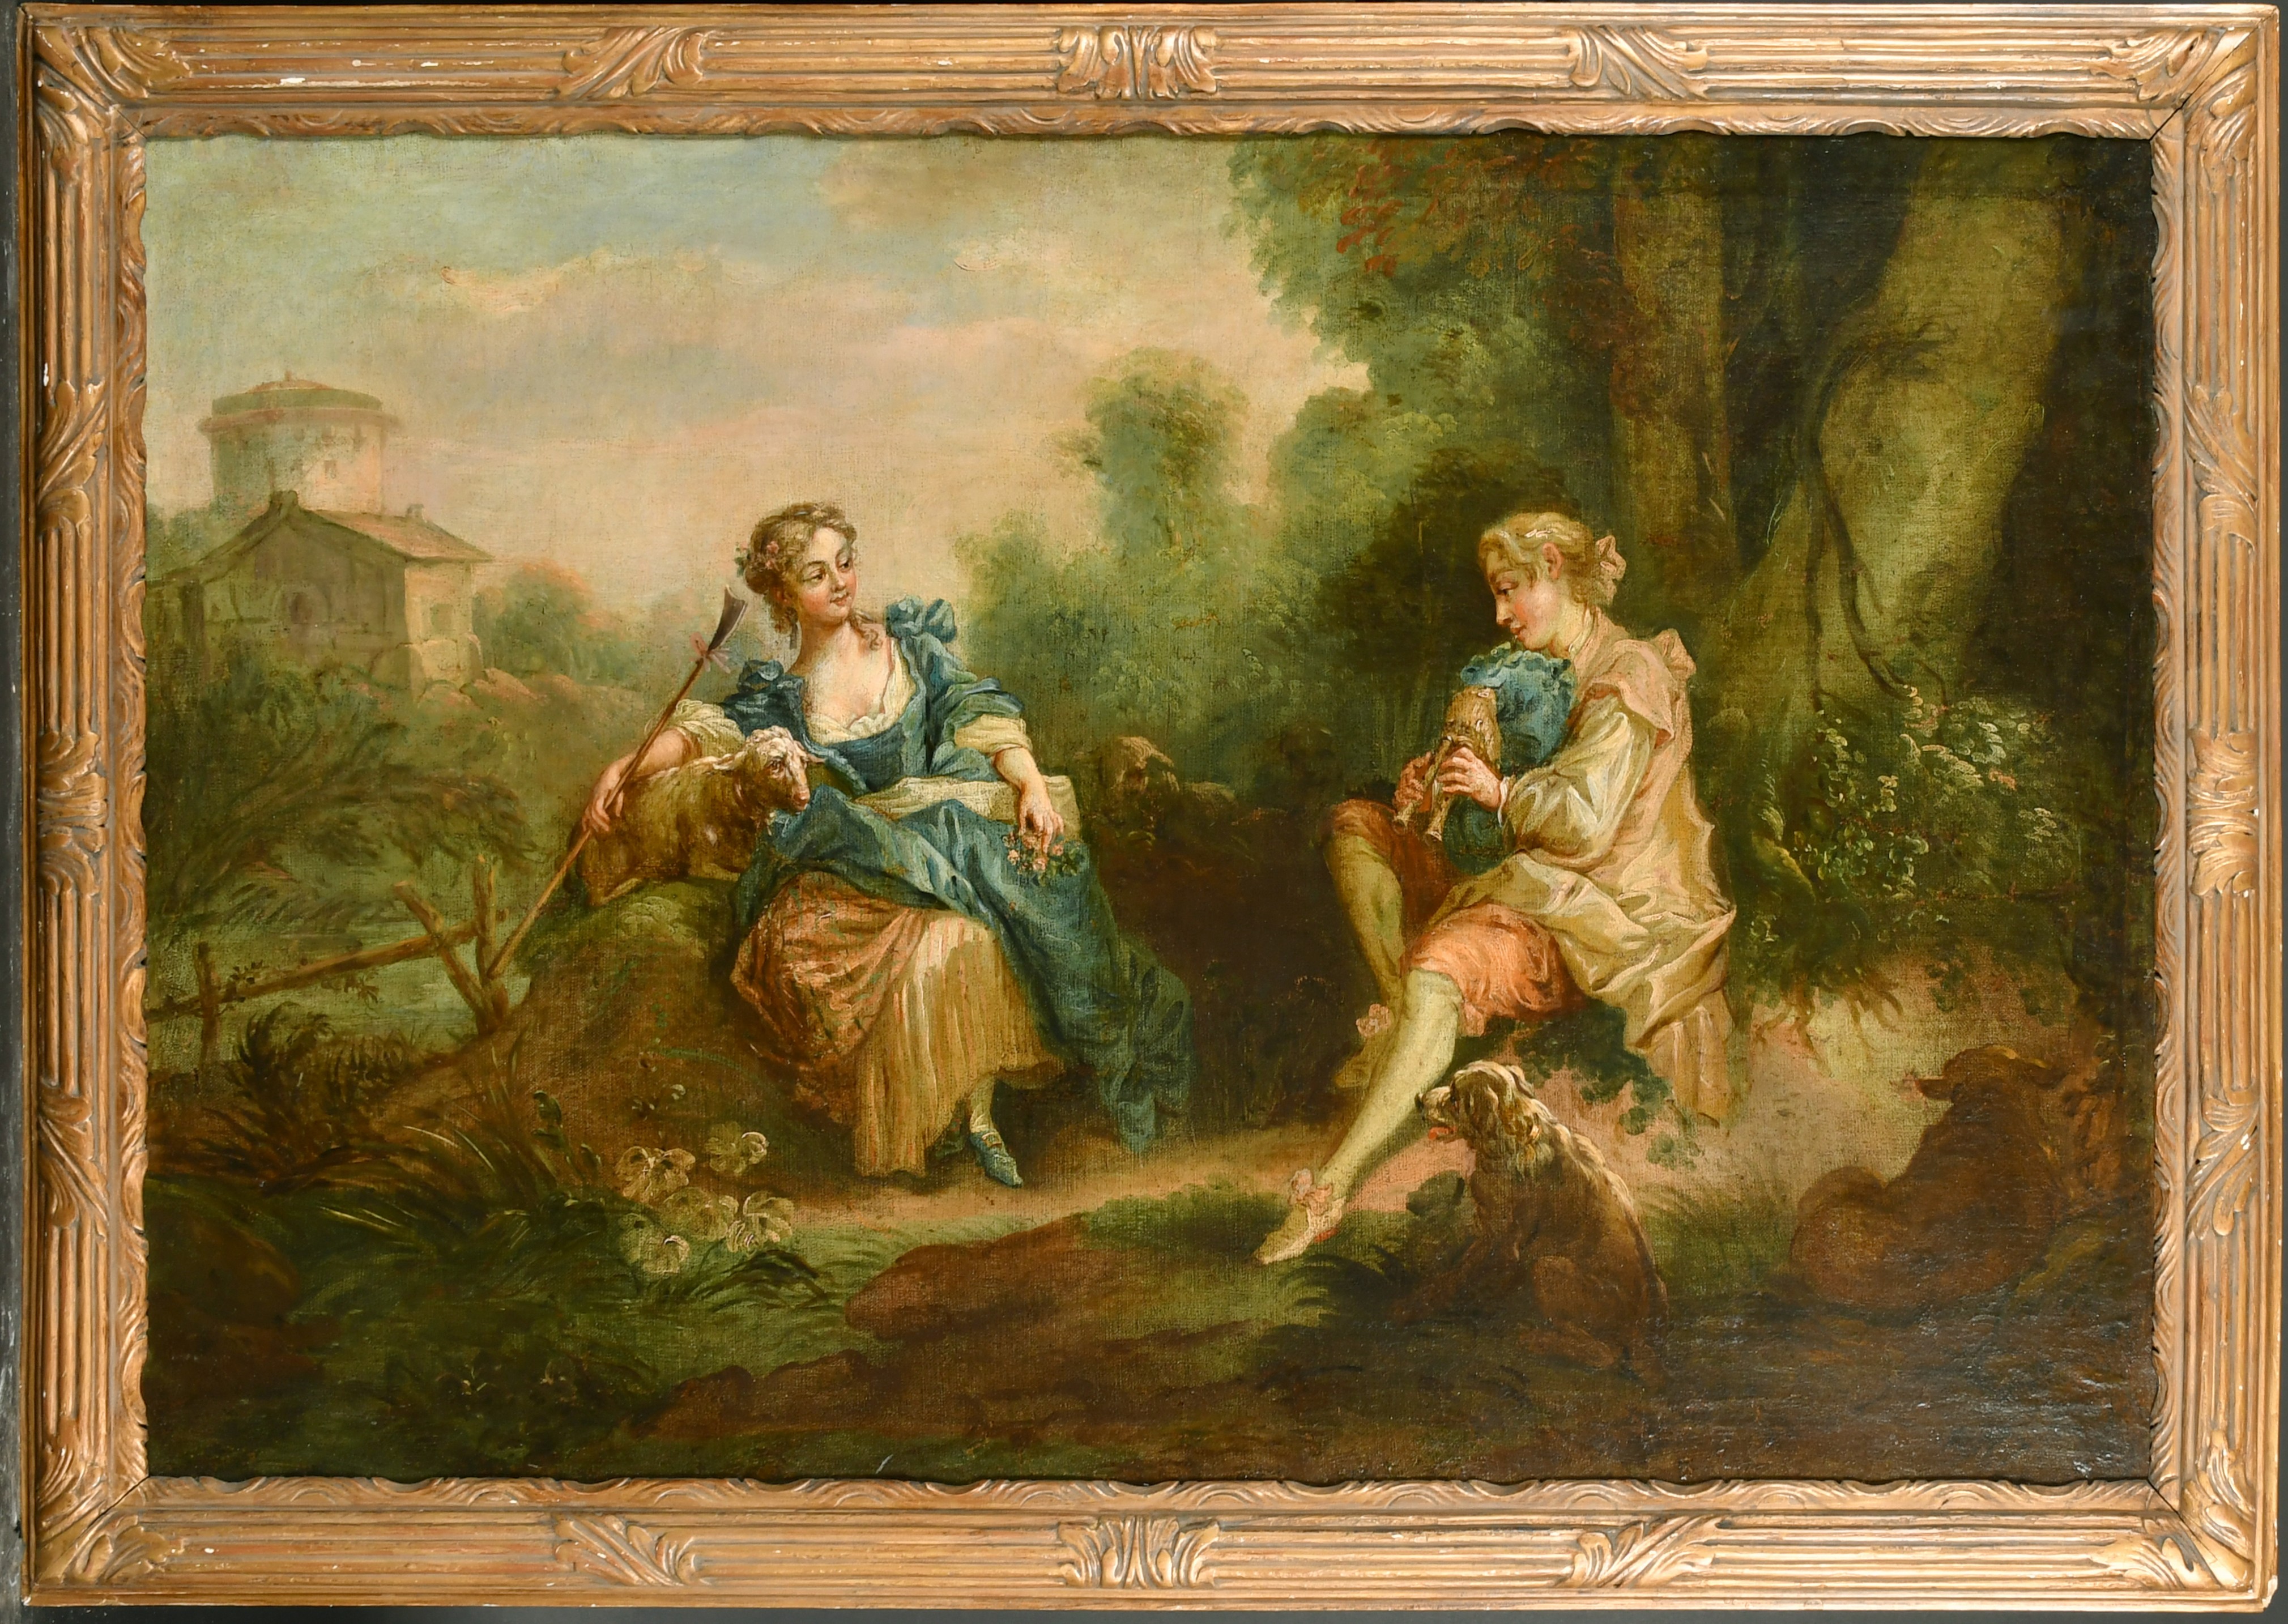 Manner of Jean-Antoine Watteau (1684-1721) French. The Serenade, Oil on Canvas, 25.25" x 38" (64.2 x - Image 2 of 3